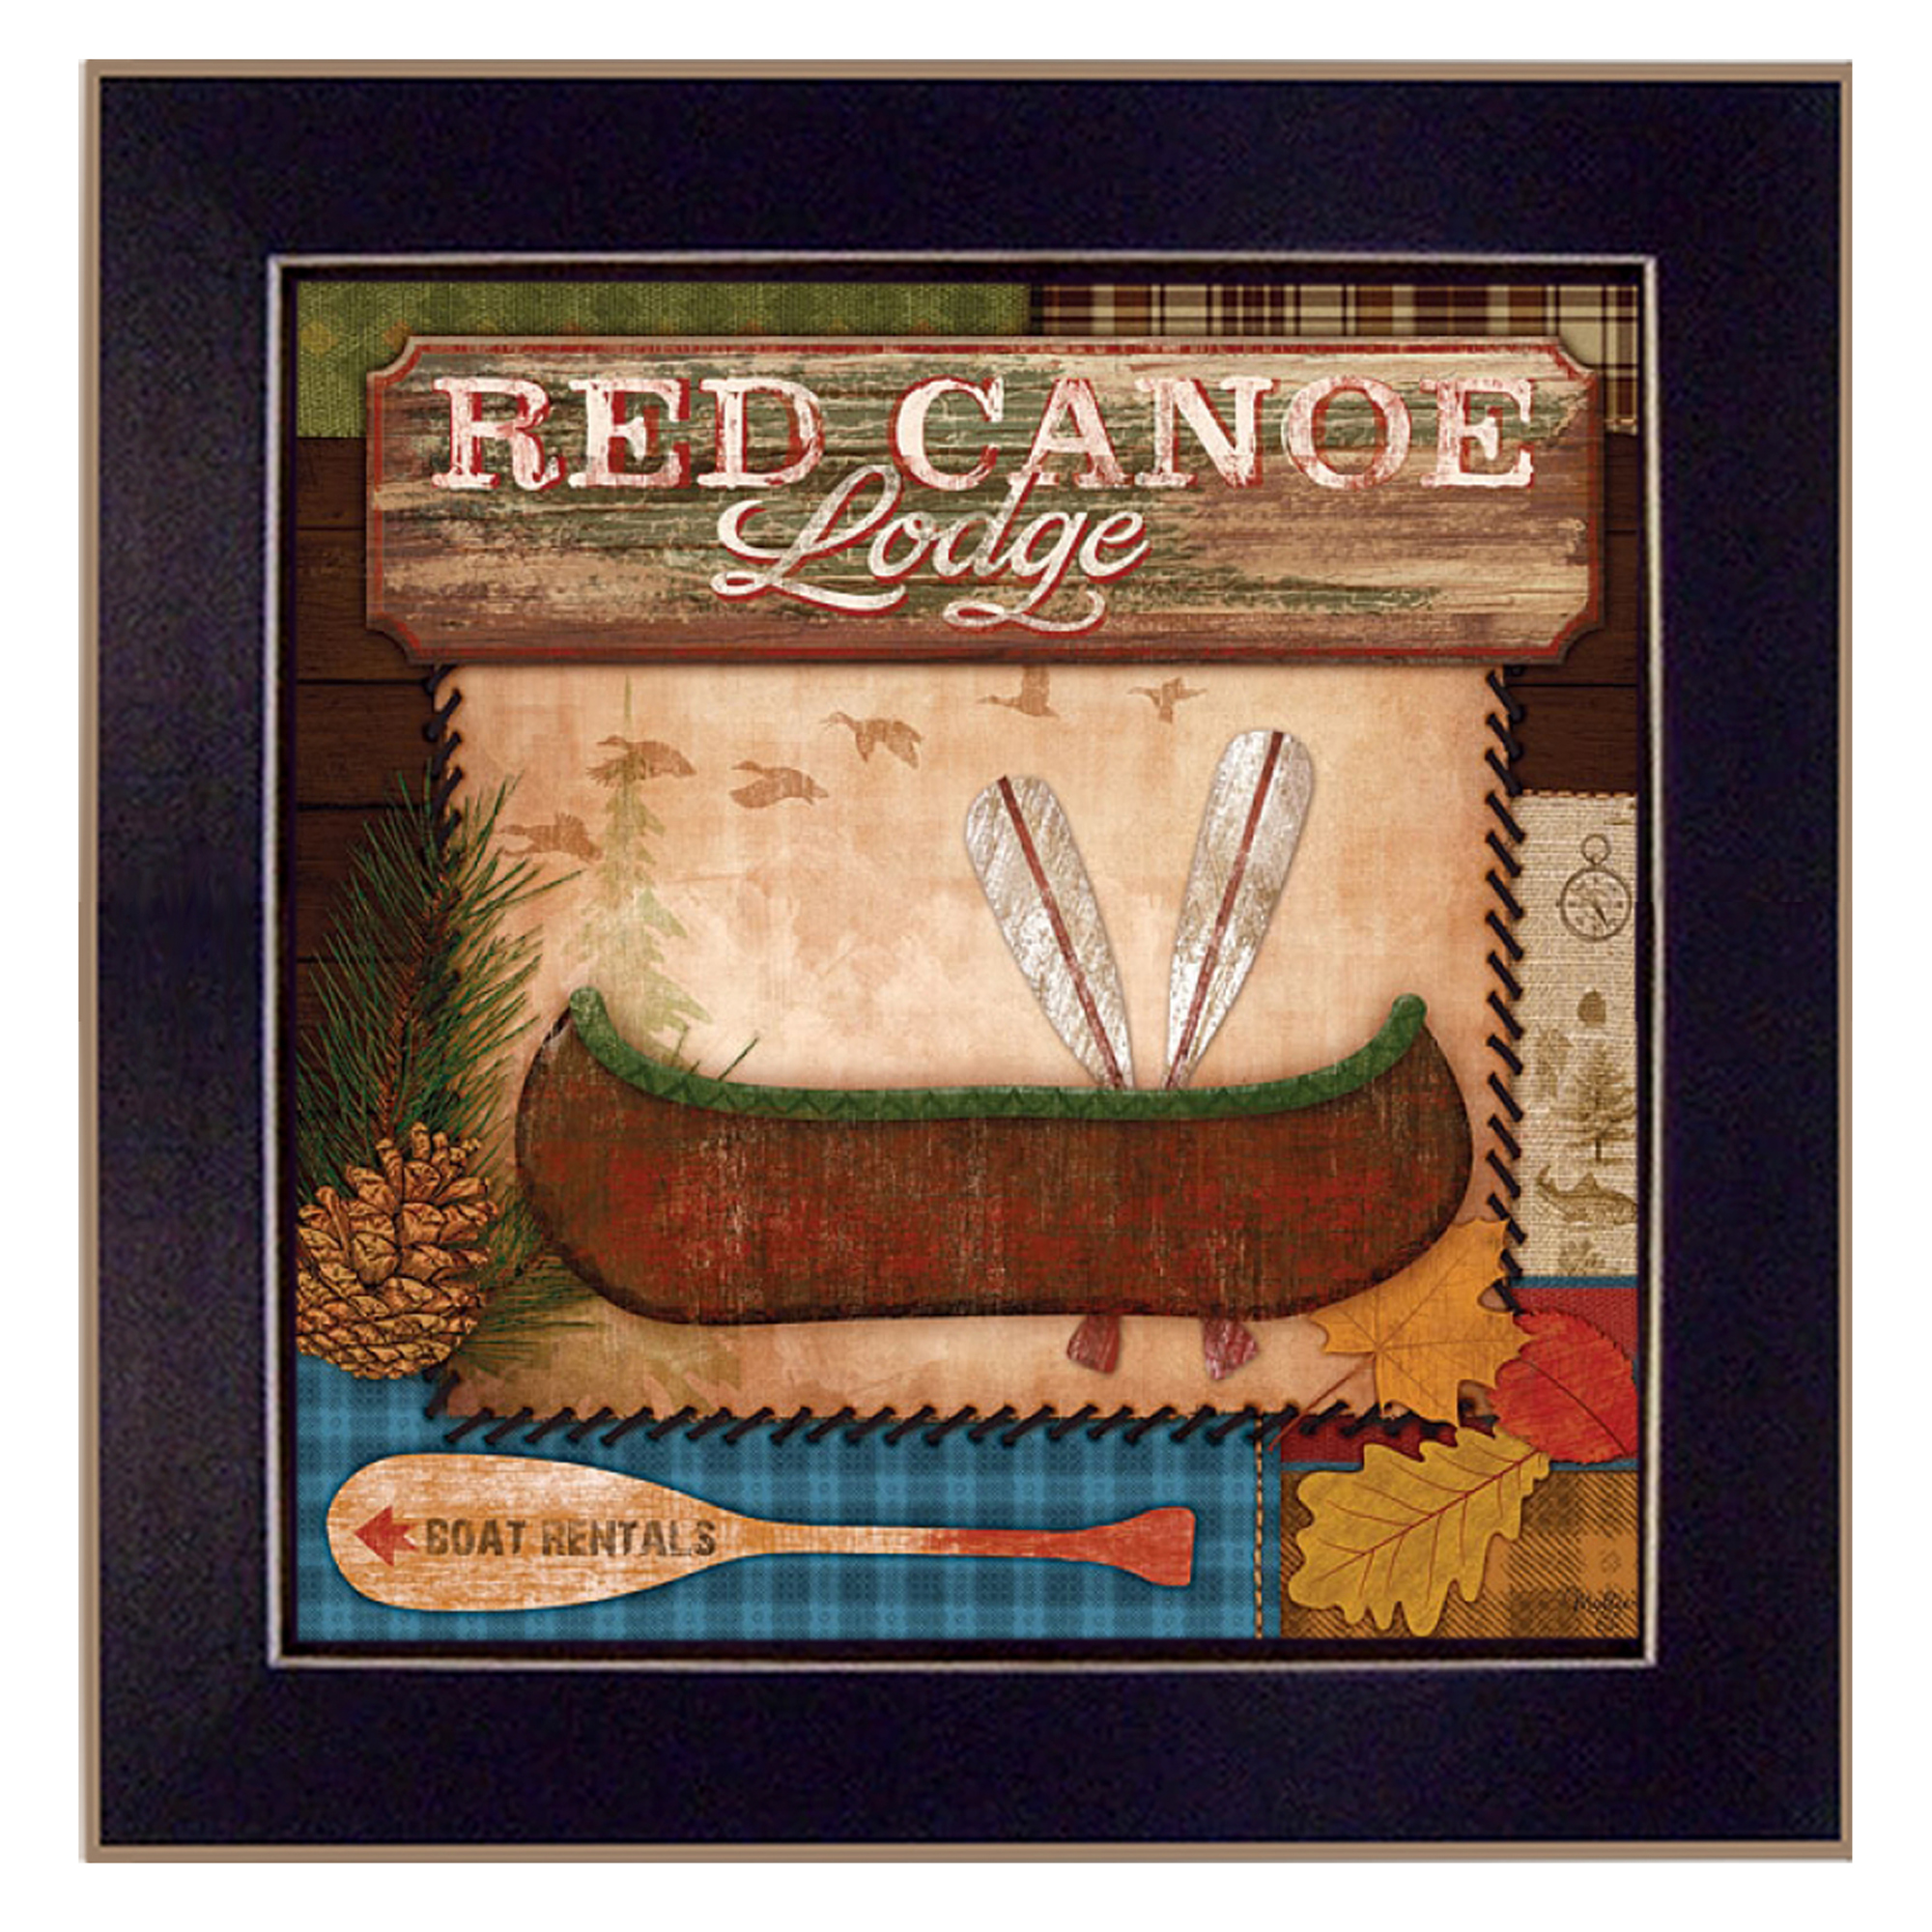 "Red Canoe Lodge" By Mollie B., Printed Wall Art, Ready To Hang Framed Poster, Black Frame